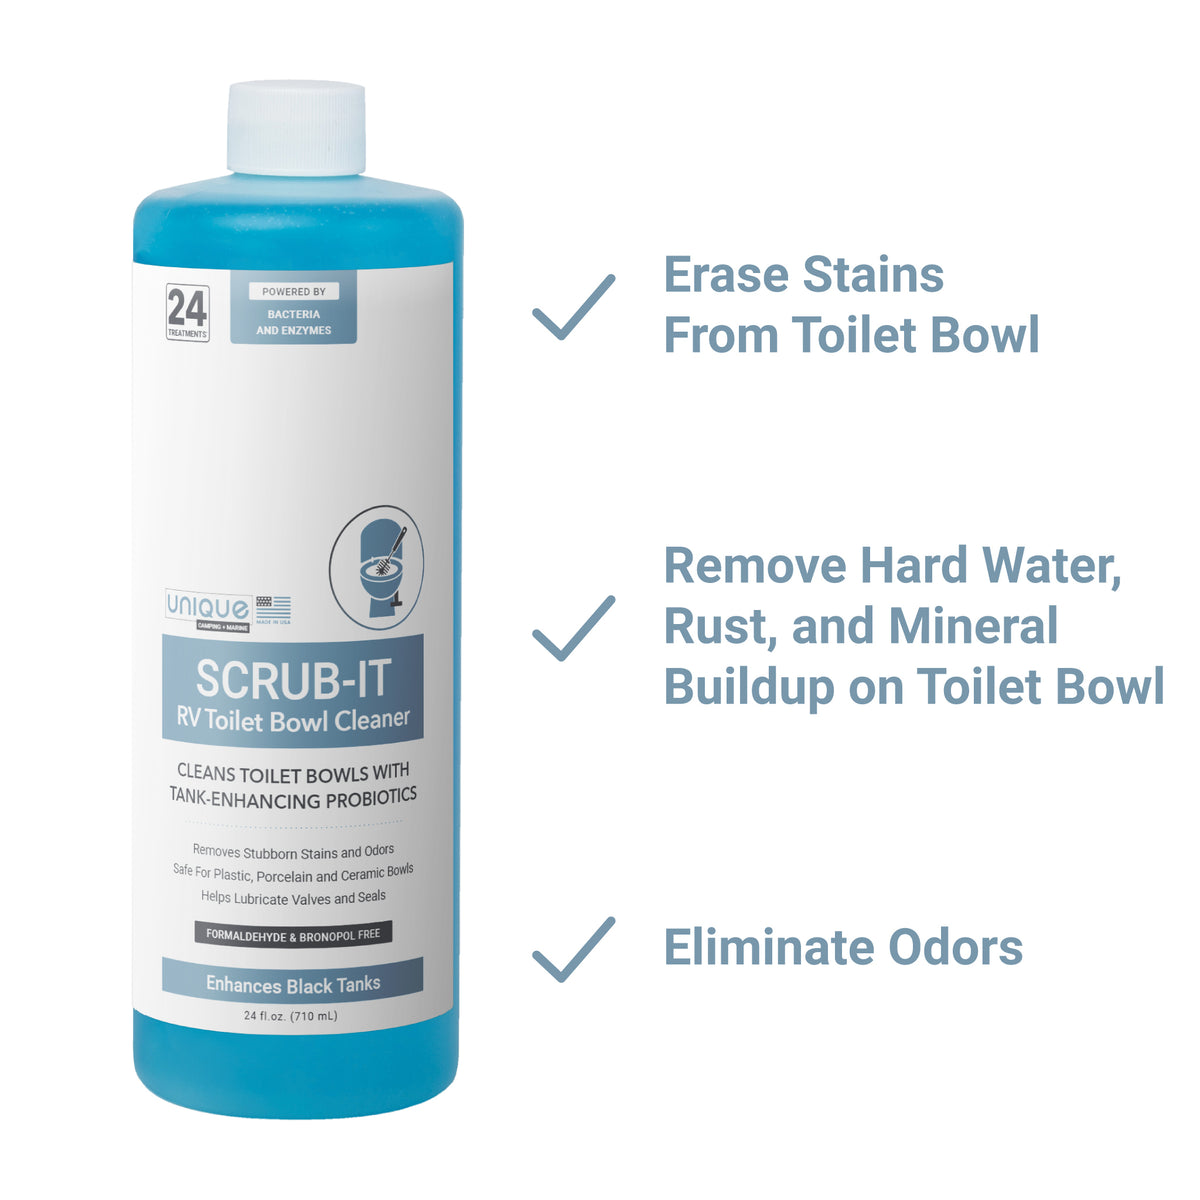 Scrub-It RV Toilet Cleaner. Erase stains, remove hard water, rust, and help eliminate odors. Unique Camping + Marine